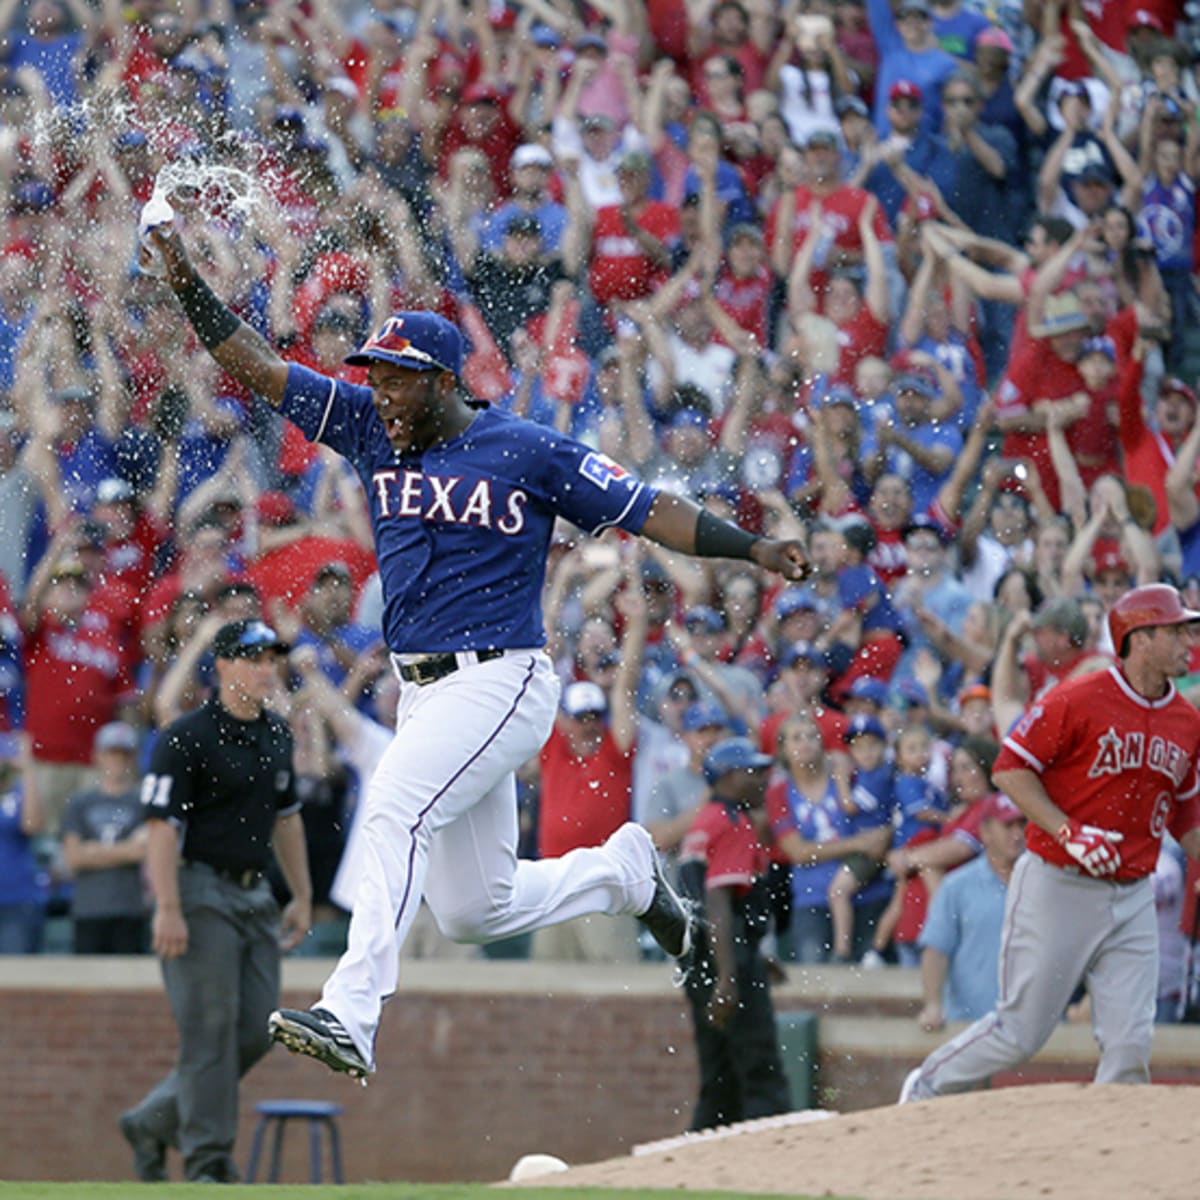 Texas Rangers sign Rougned Odor, brother of Rougned Odor